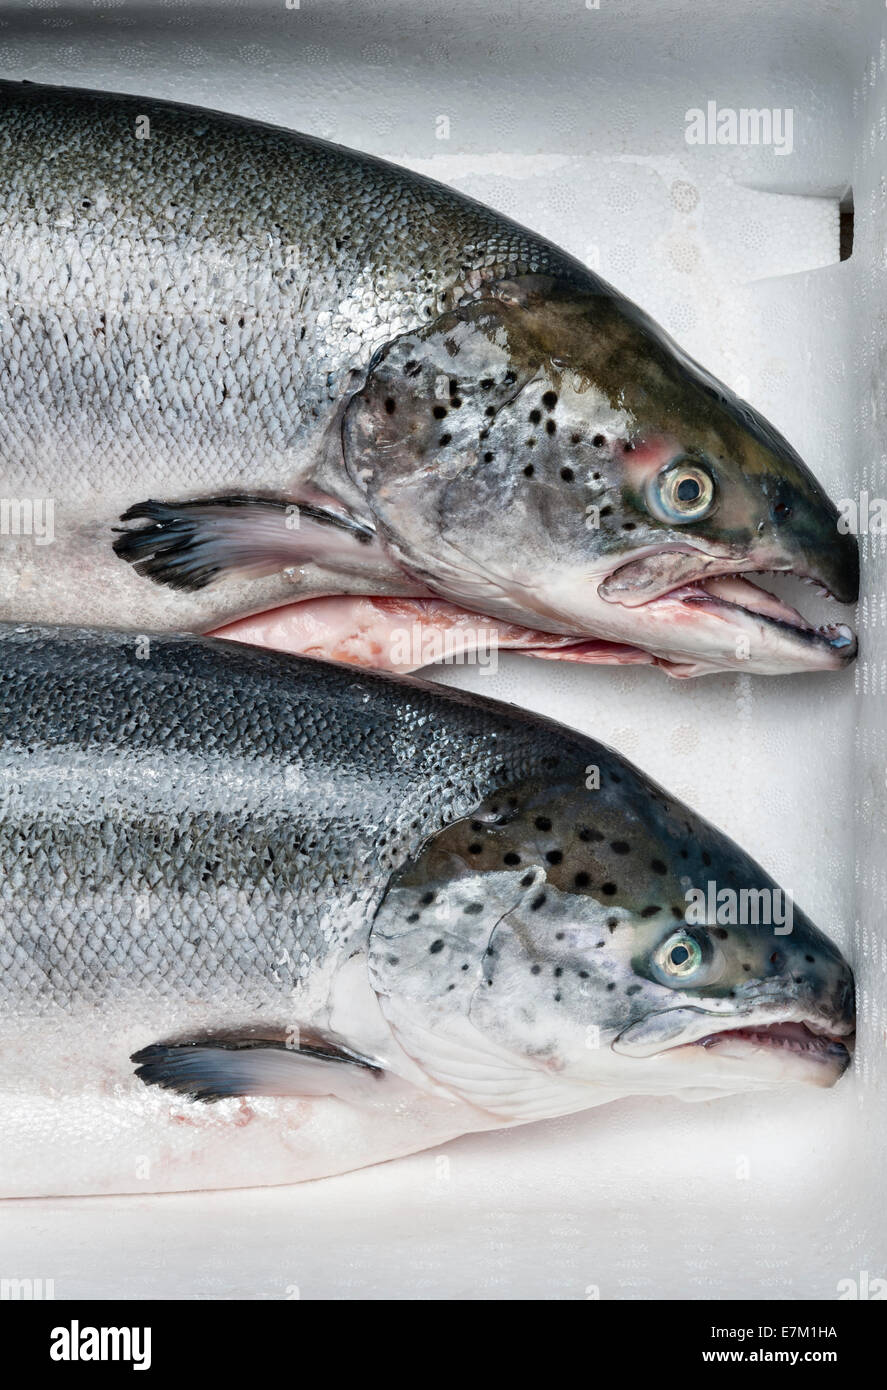 Two fresh farmed salmon bought from the fishmonger, in an insulating polystyrene cool box (UK) Stock Photo